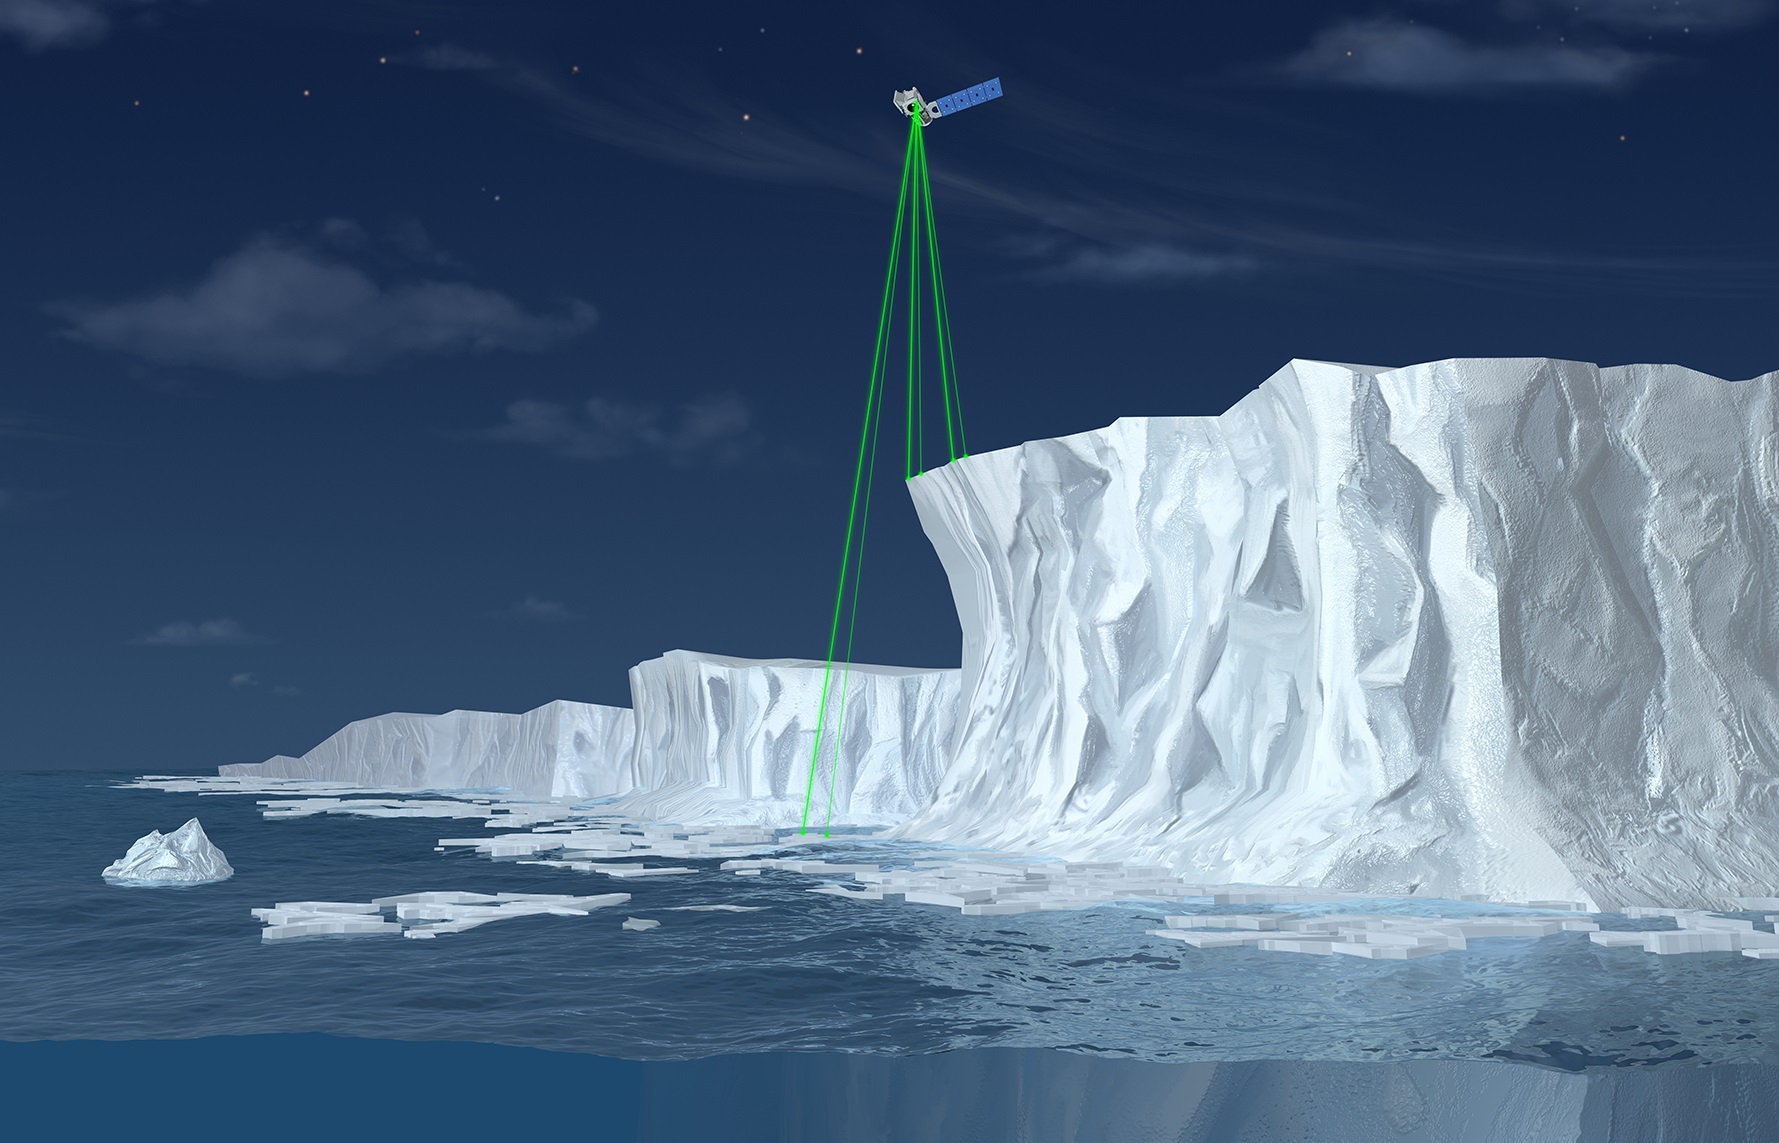 Illustration of NASA’s Ice, Cloud and land Elevation Satellite-2 (ICESat-2), a mission to measure the height of Earth's ice.